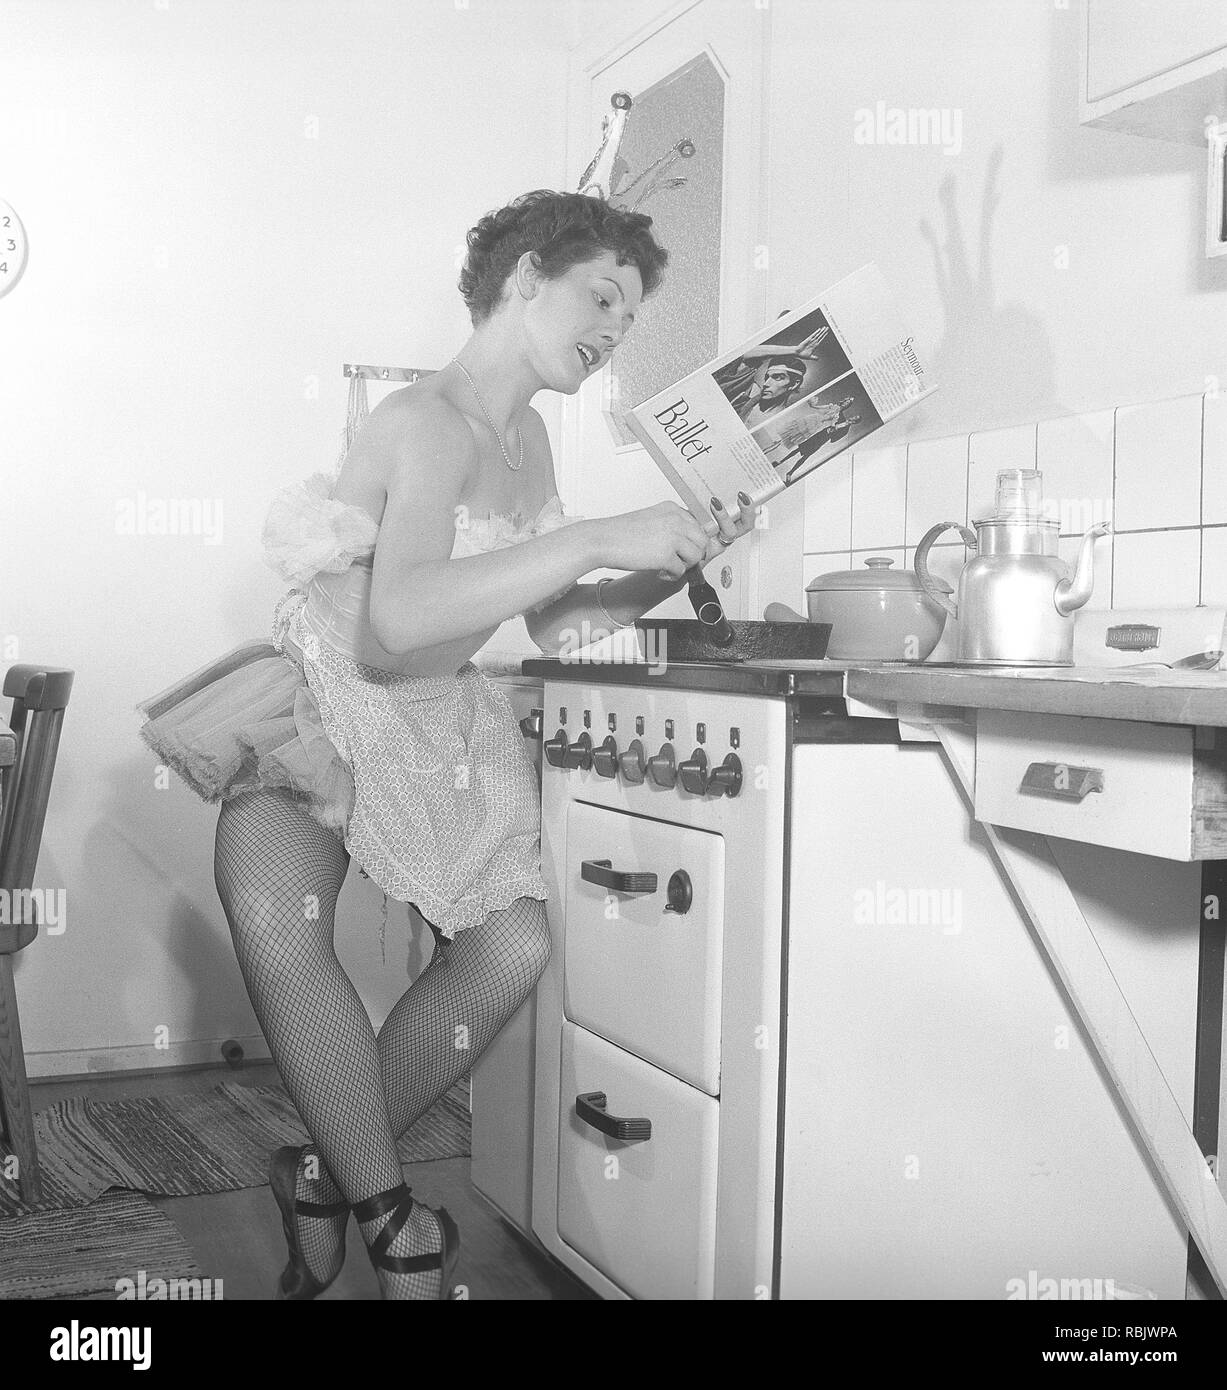 Ballerina in the 1950s. A young ballerina all dressed up in her costume and shoes is sitting by the kitchen stove reading a book about Ballet. Photo Kristoffersson Ref BK5-4. Sweden 1953 Stock Photo